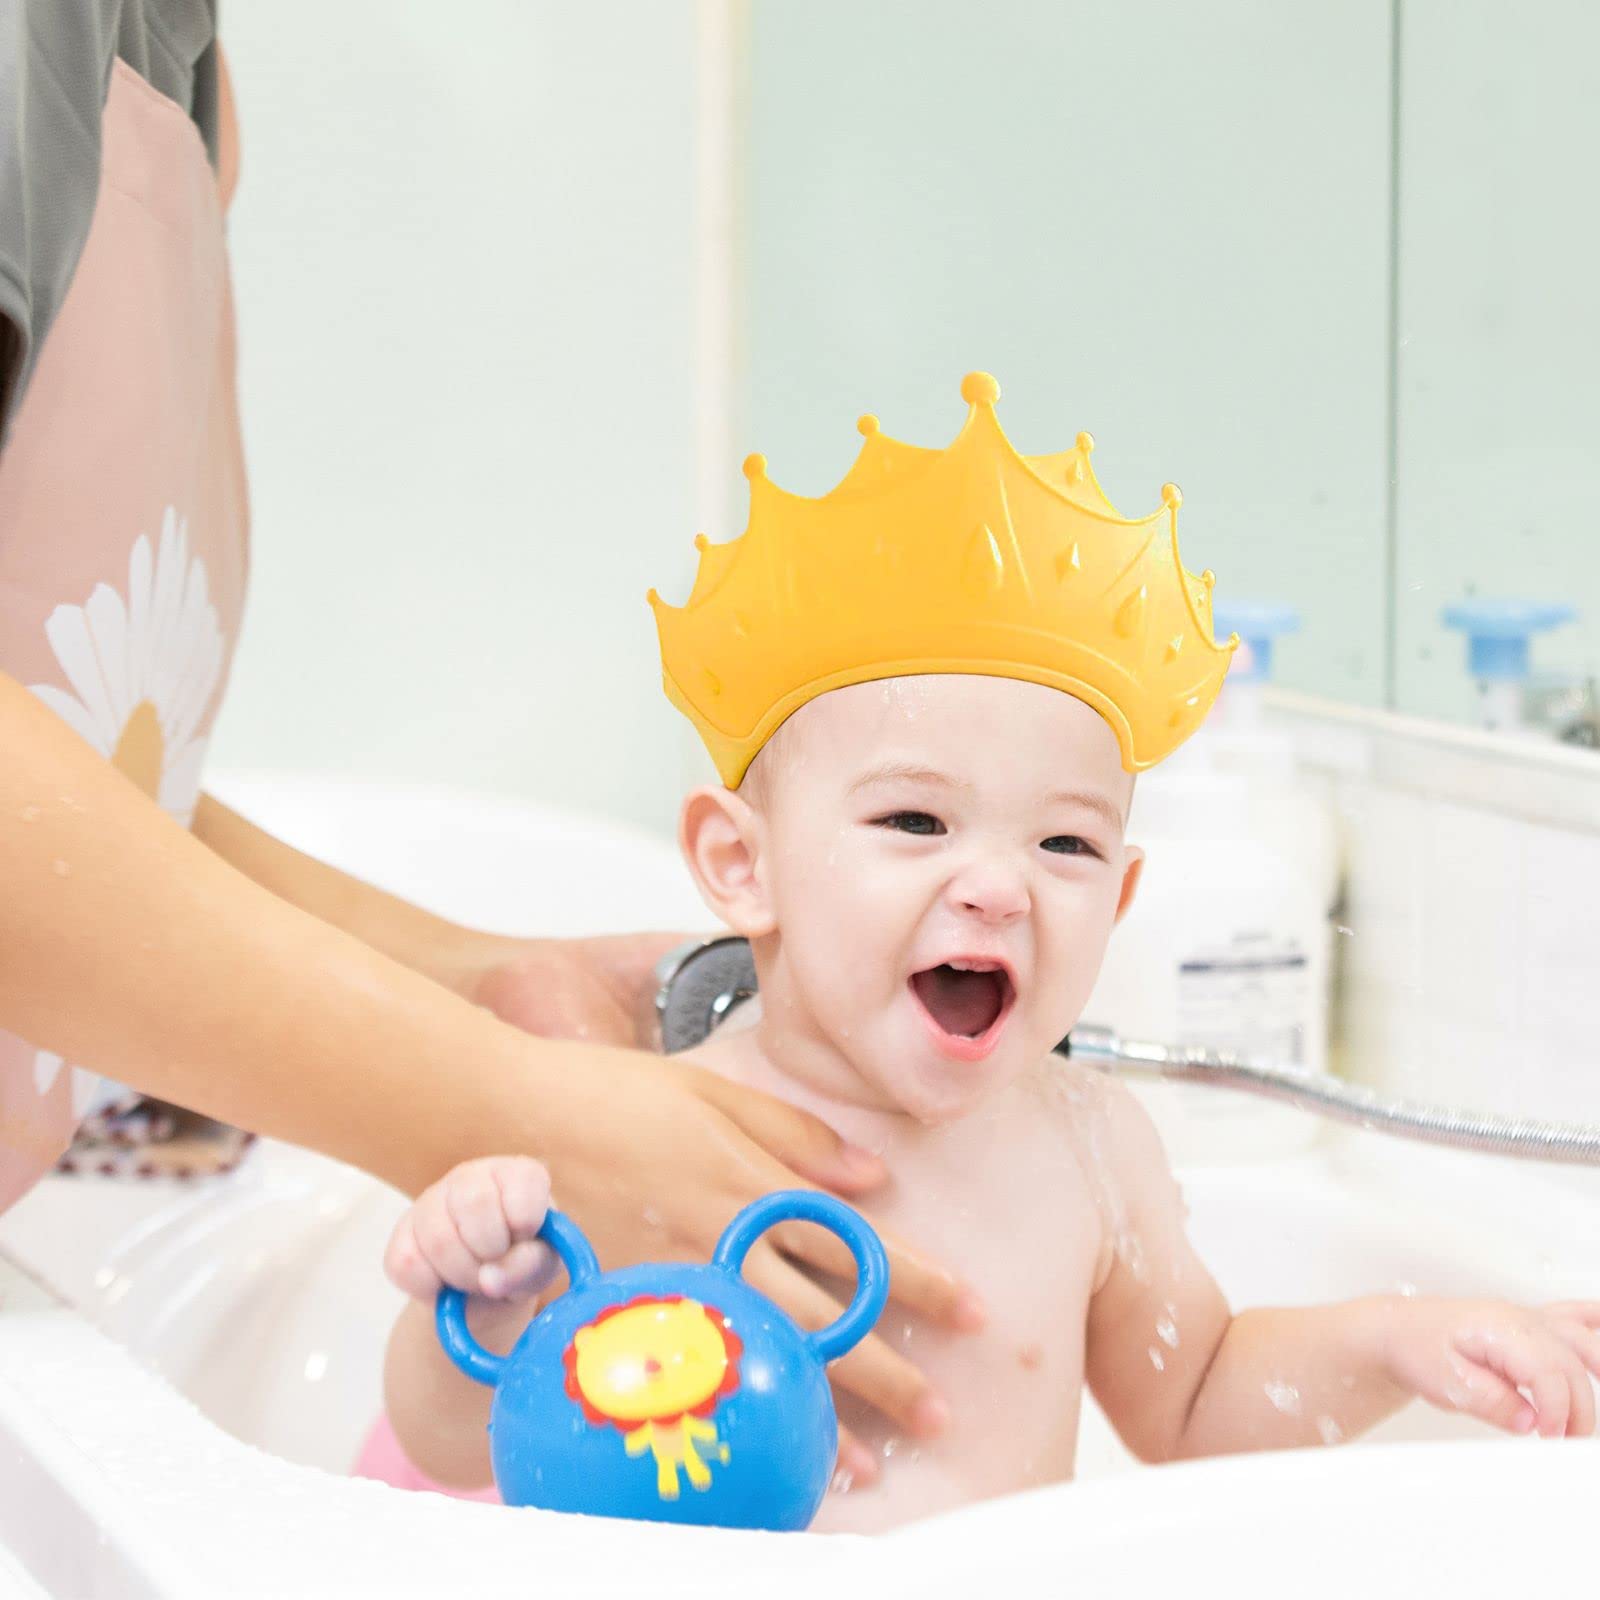 AZXIVIZ Baby Shower Cap Silicone for Children, Soft Adjustable Bathing Crown Hat Safe for Washing Hair, Protect Eyes and Ears from Shampoo for Baby, Toddlers and Kids from 6 Months to 12-Year Old